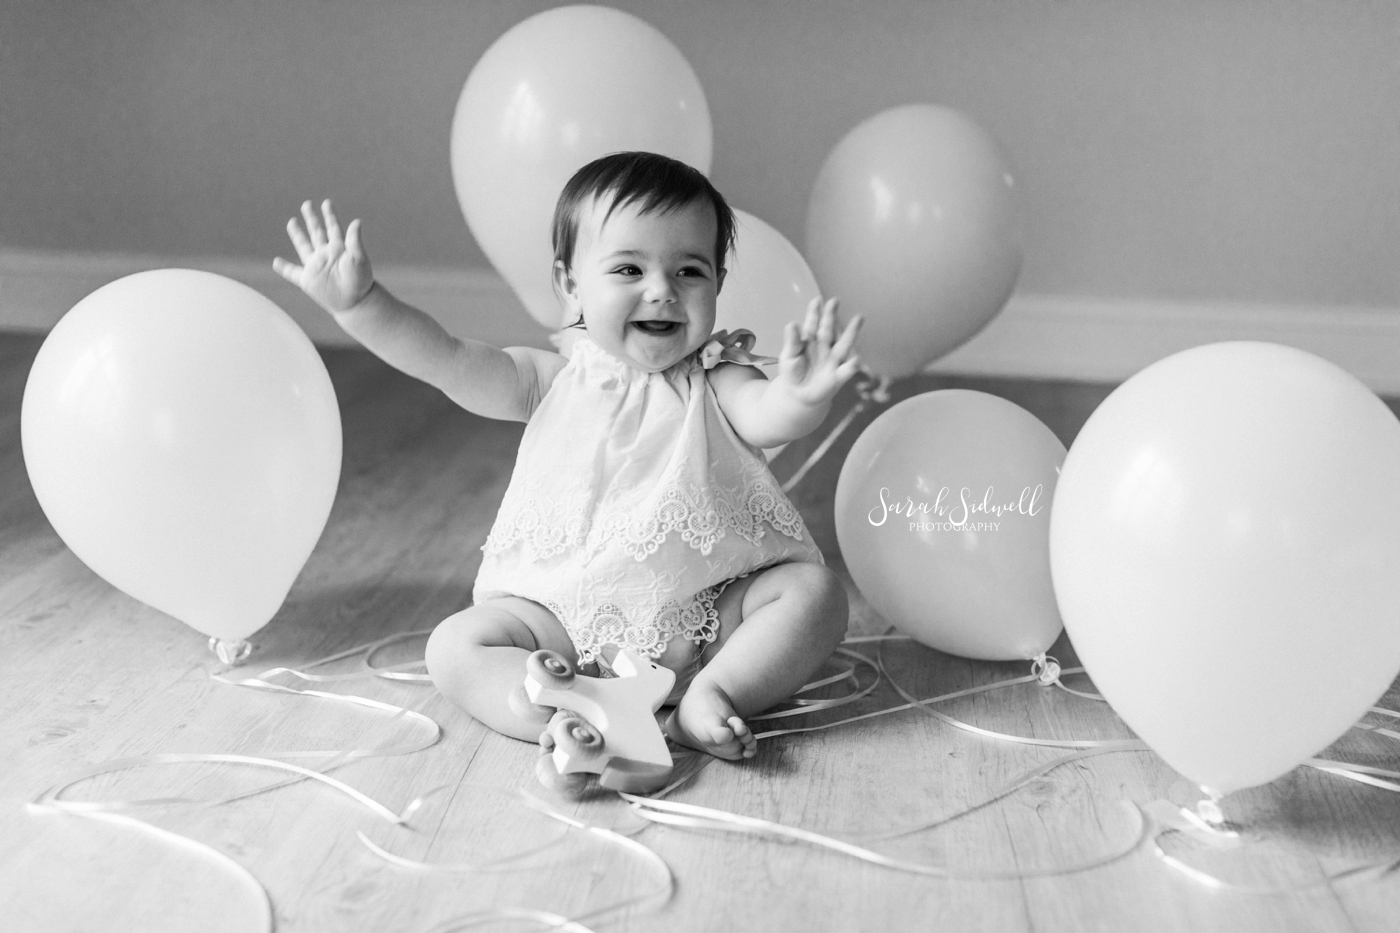 A baby pushes balloons out of her way. 